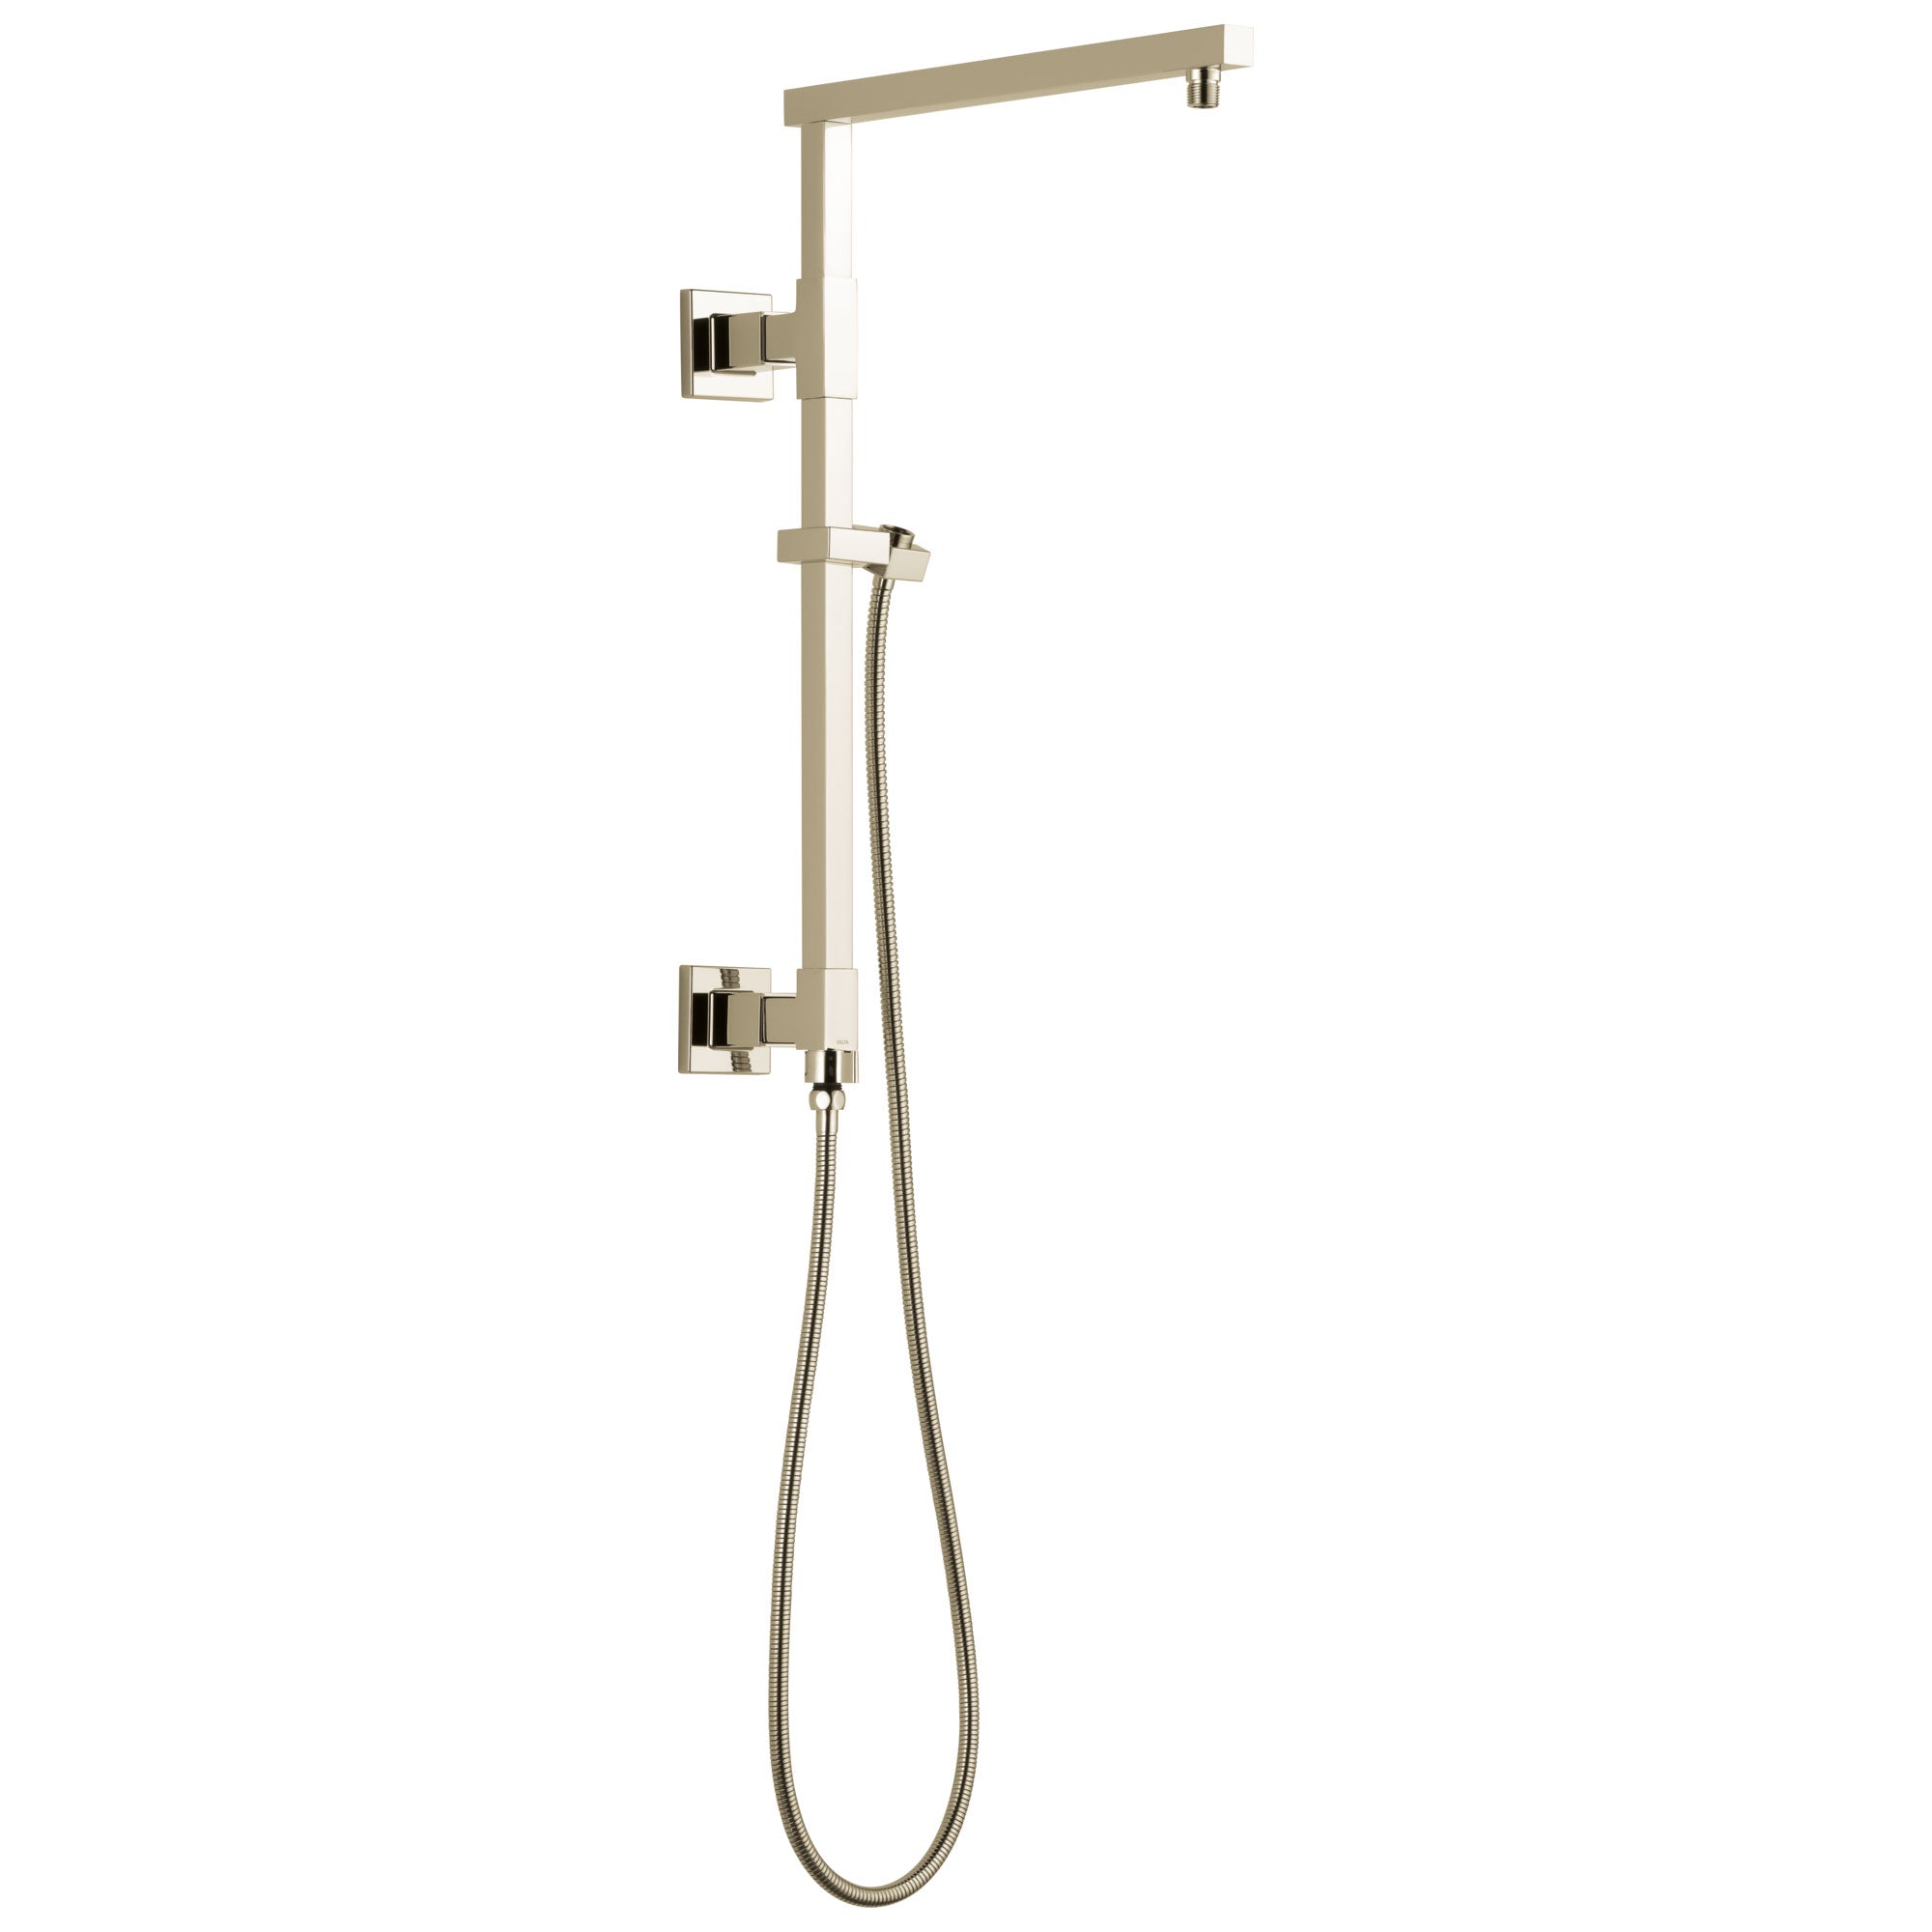 Delta Polished Nickel Finish Emerge Modern Angular Square Shower Column 18" (Requires Showerhead, Hand Spray, and Control) D58410PN